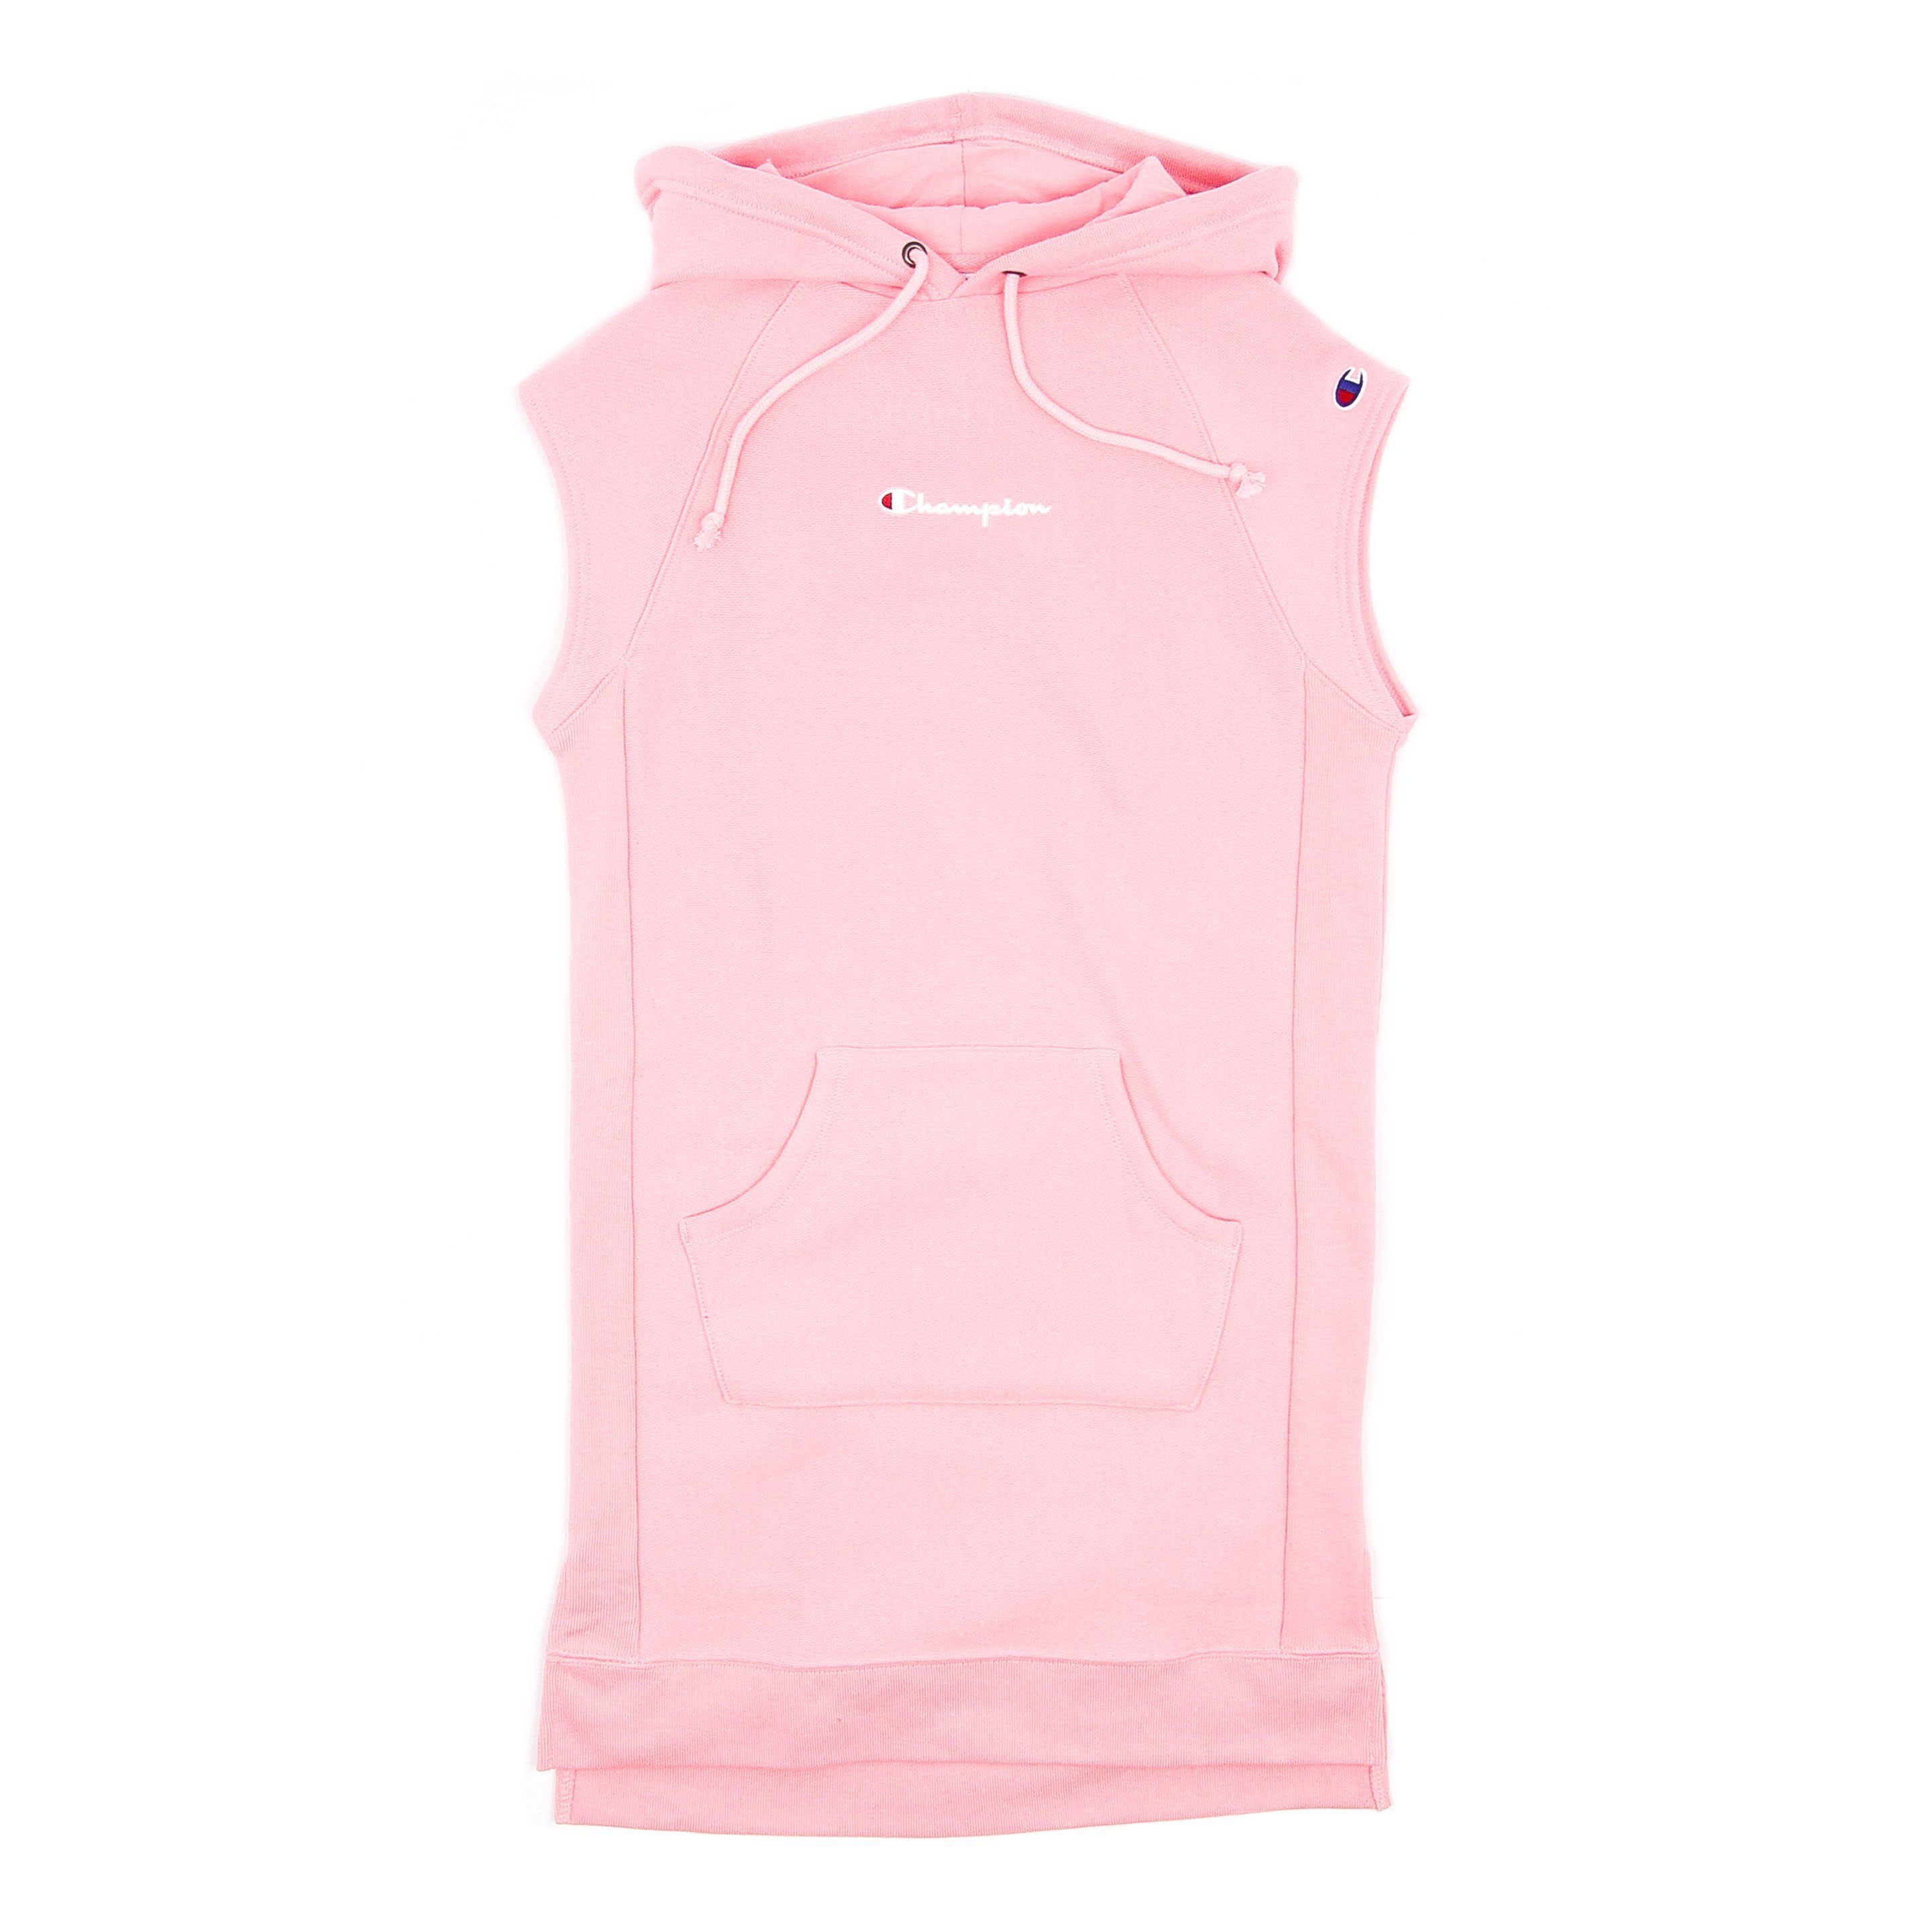 SKIRTS - Champion Women's Reverse Weave Dress W/hood Embroidered Pink Bow WL779-579727-7CY